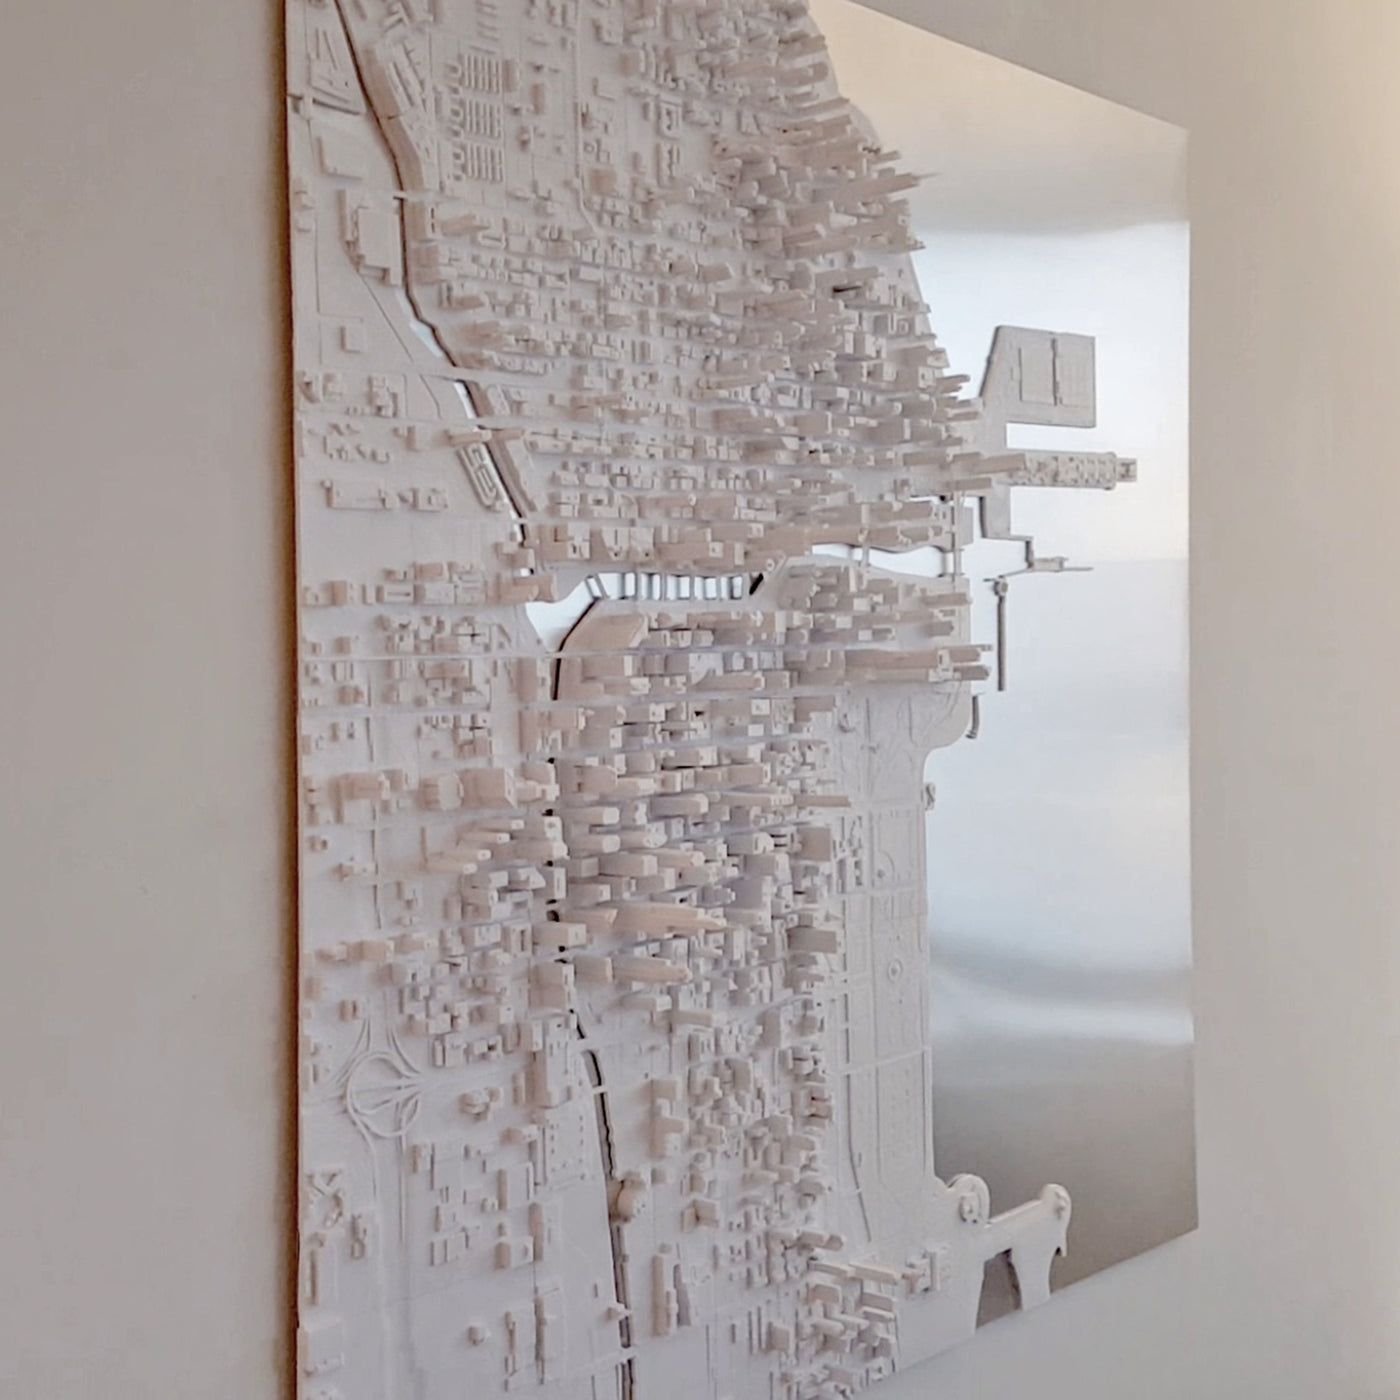 Microscape's downtown Chicago model on metal. The metal forms the surface of Lake Michigan and the Chicago River.